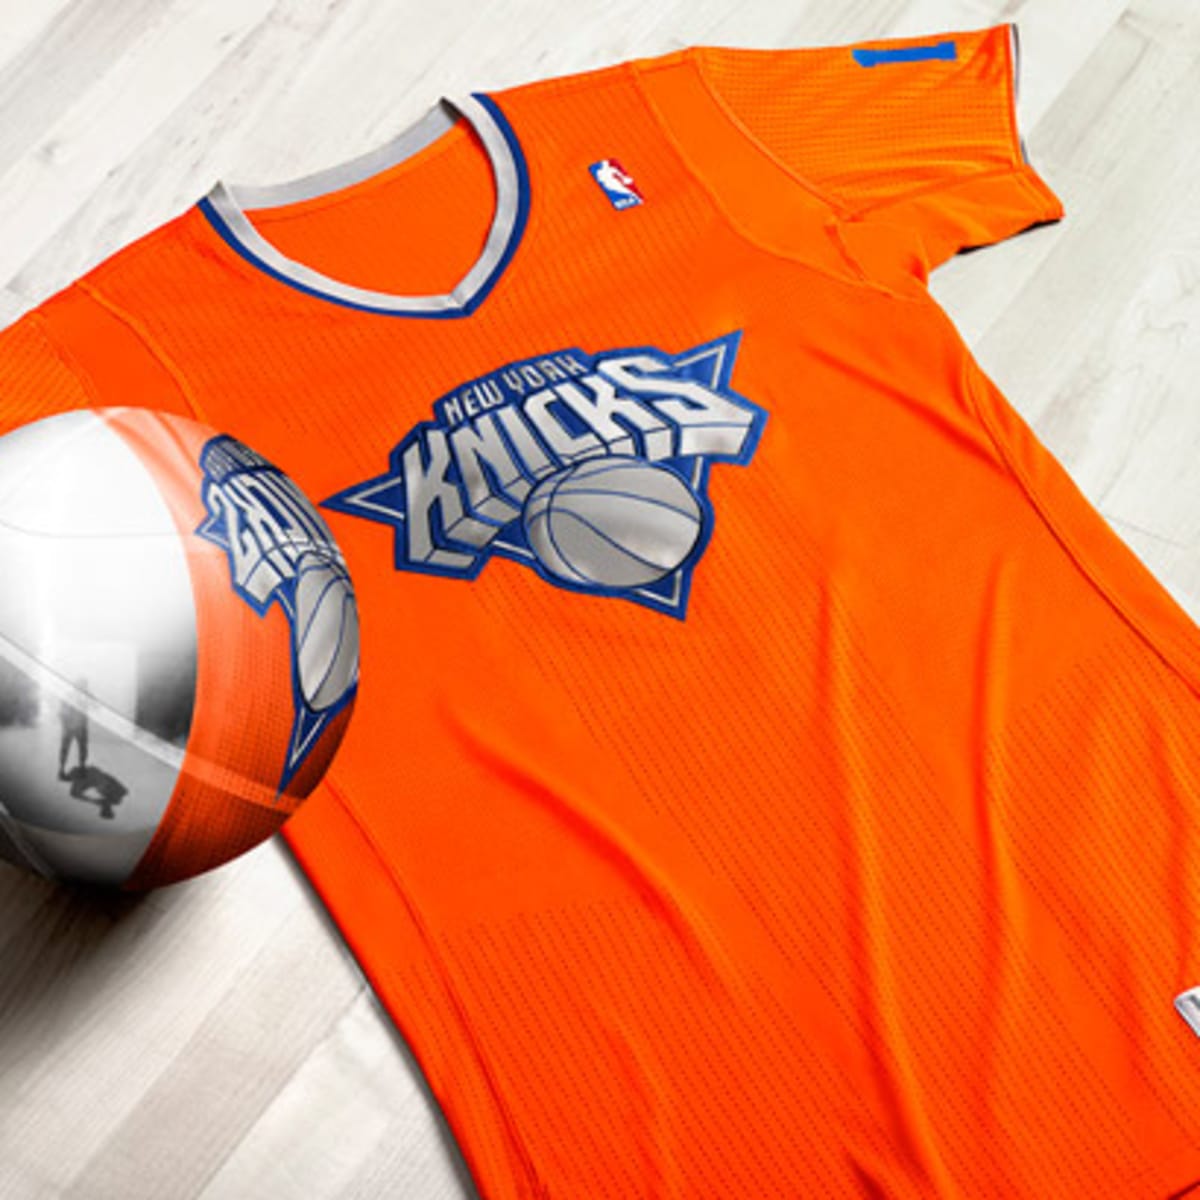 NBA Christmas Jerseys—Now With Sleeves - WSJ